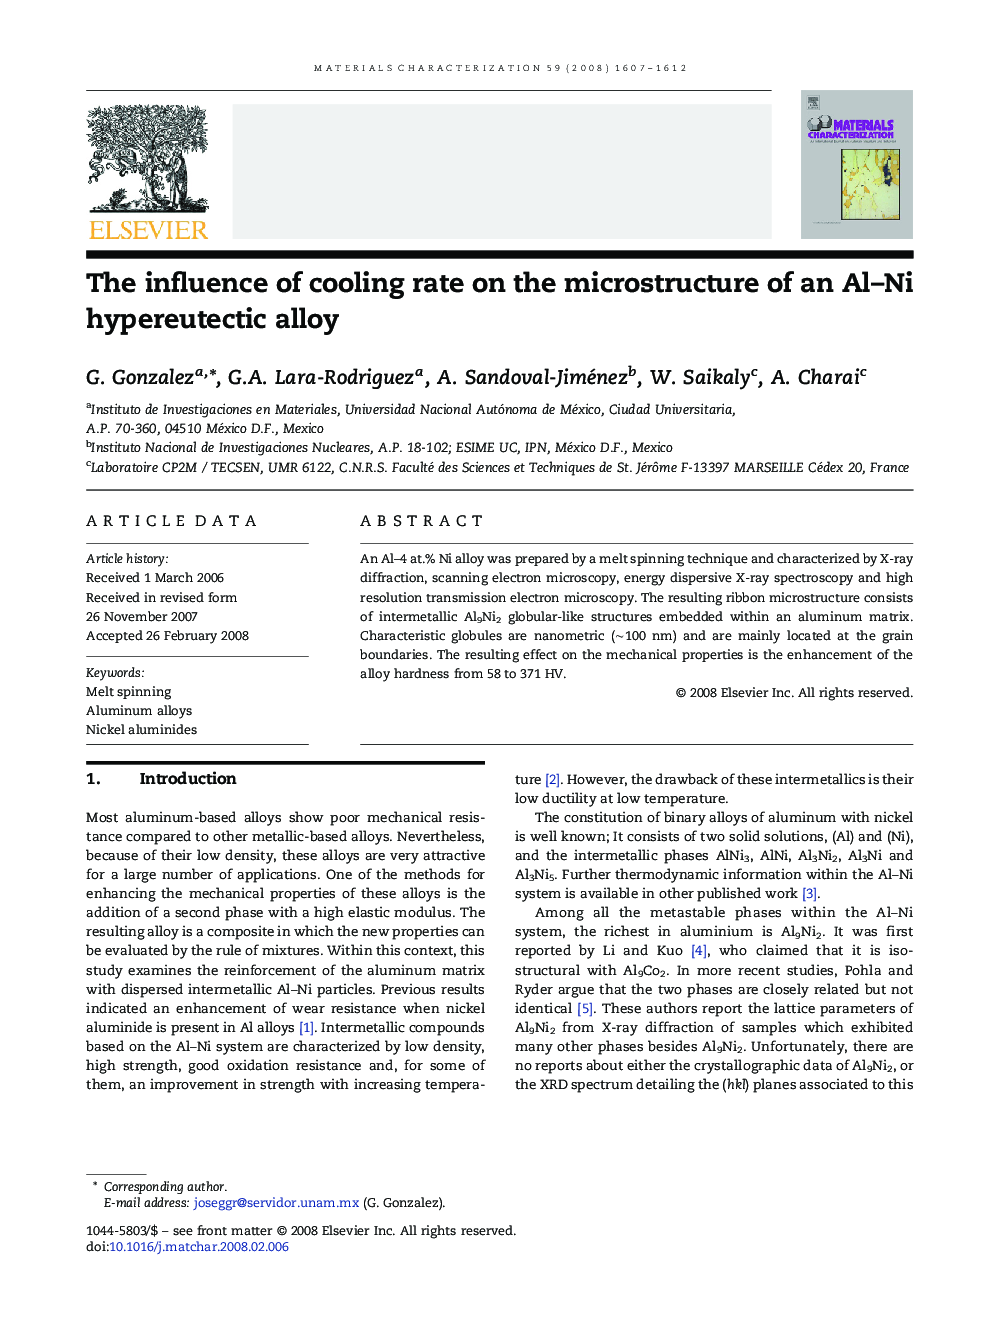 The influence of cooling rate on the microstructure of an Al–Ni hypereutectic alloy